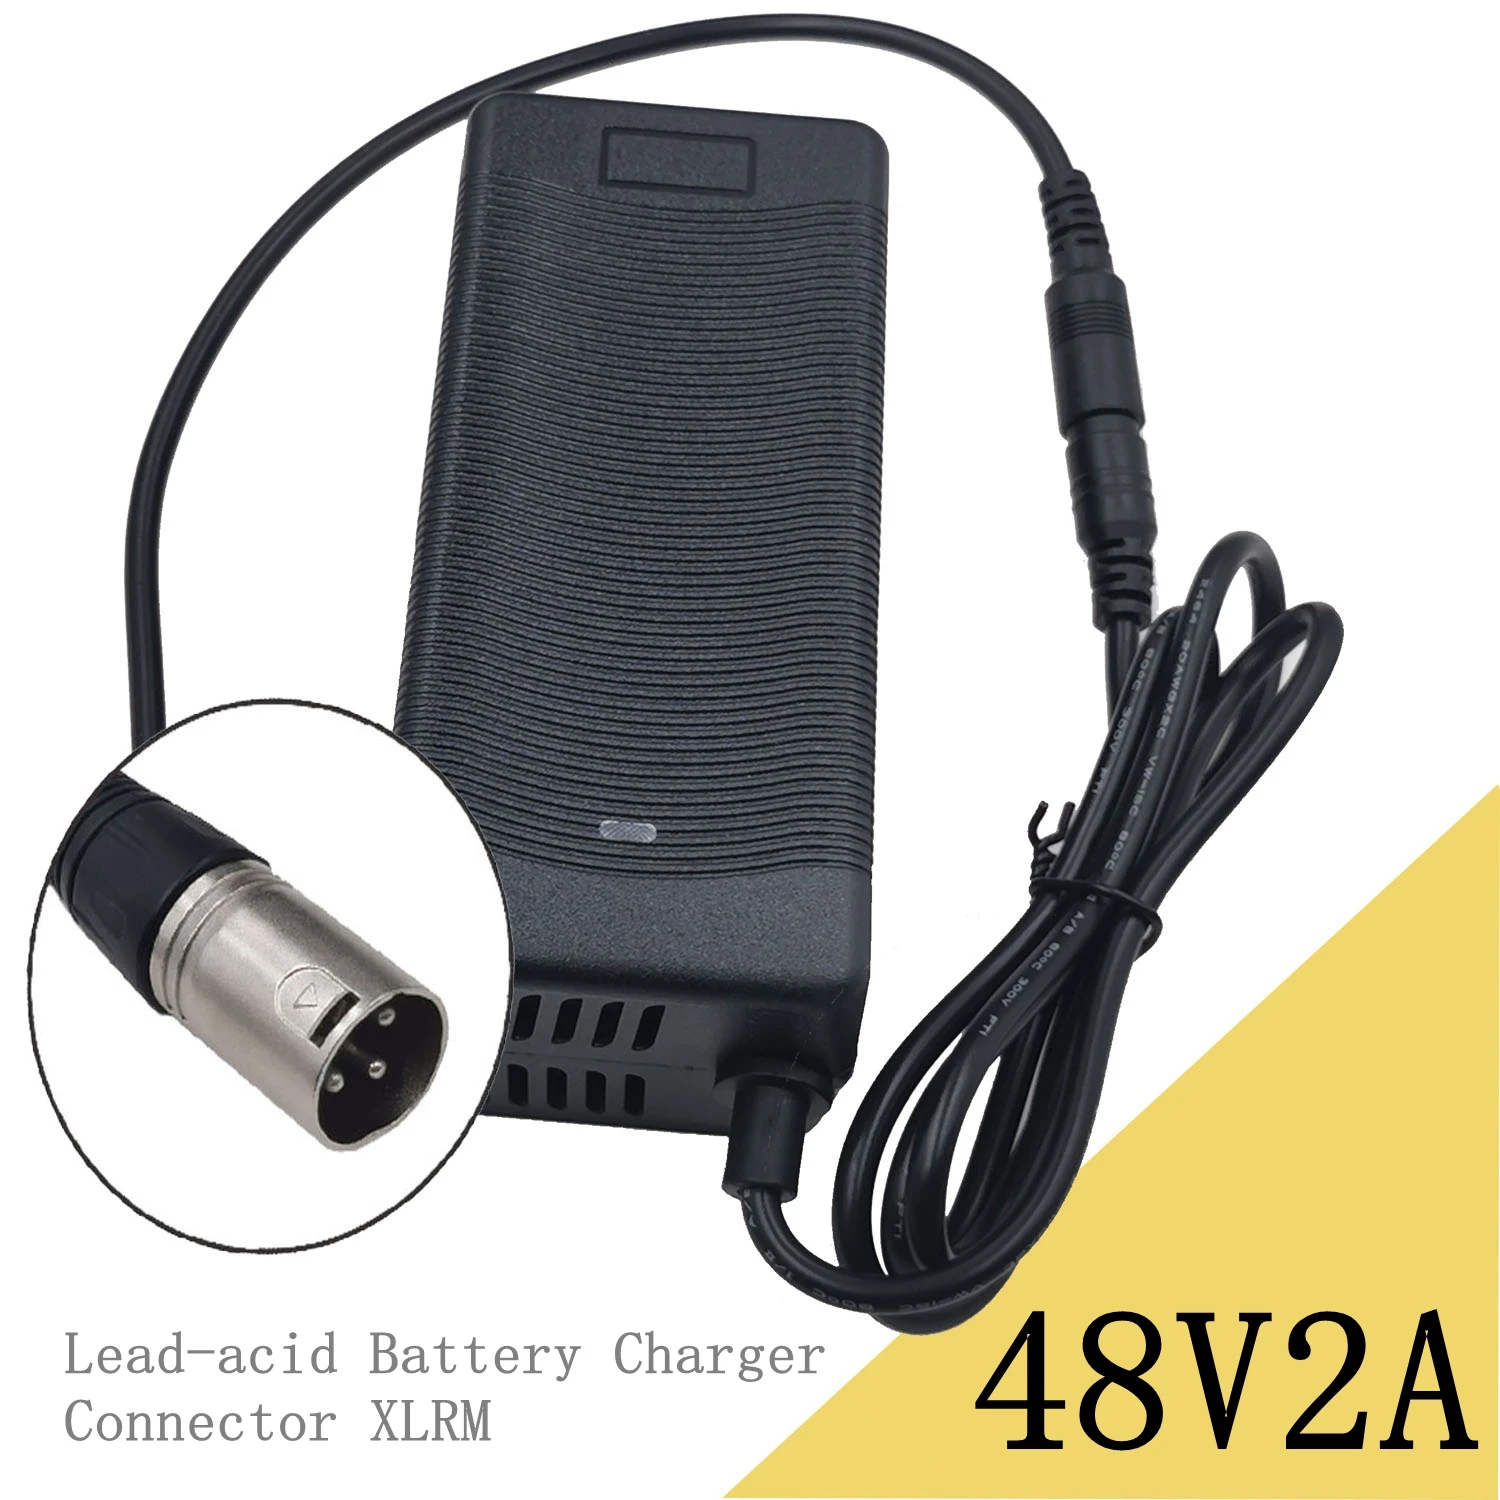 

48V 2A Lead-acid Battery Charger for 57.6V Lead acid Battery Electric Bicycle Bike Scooters Motorcycle Charger xlrm Connector